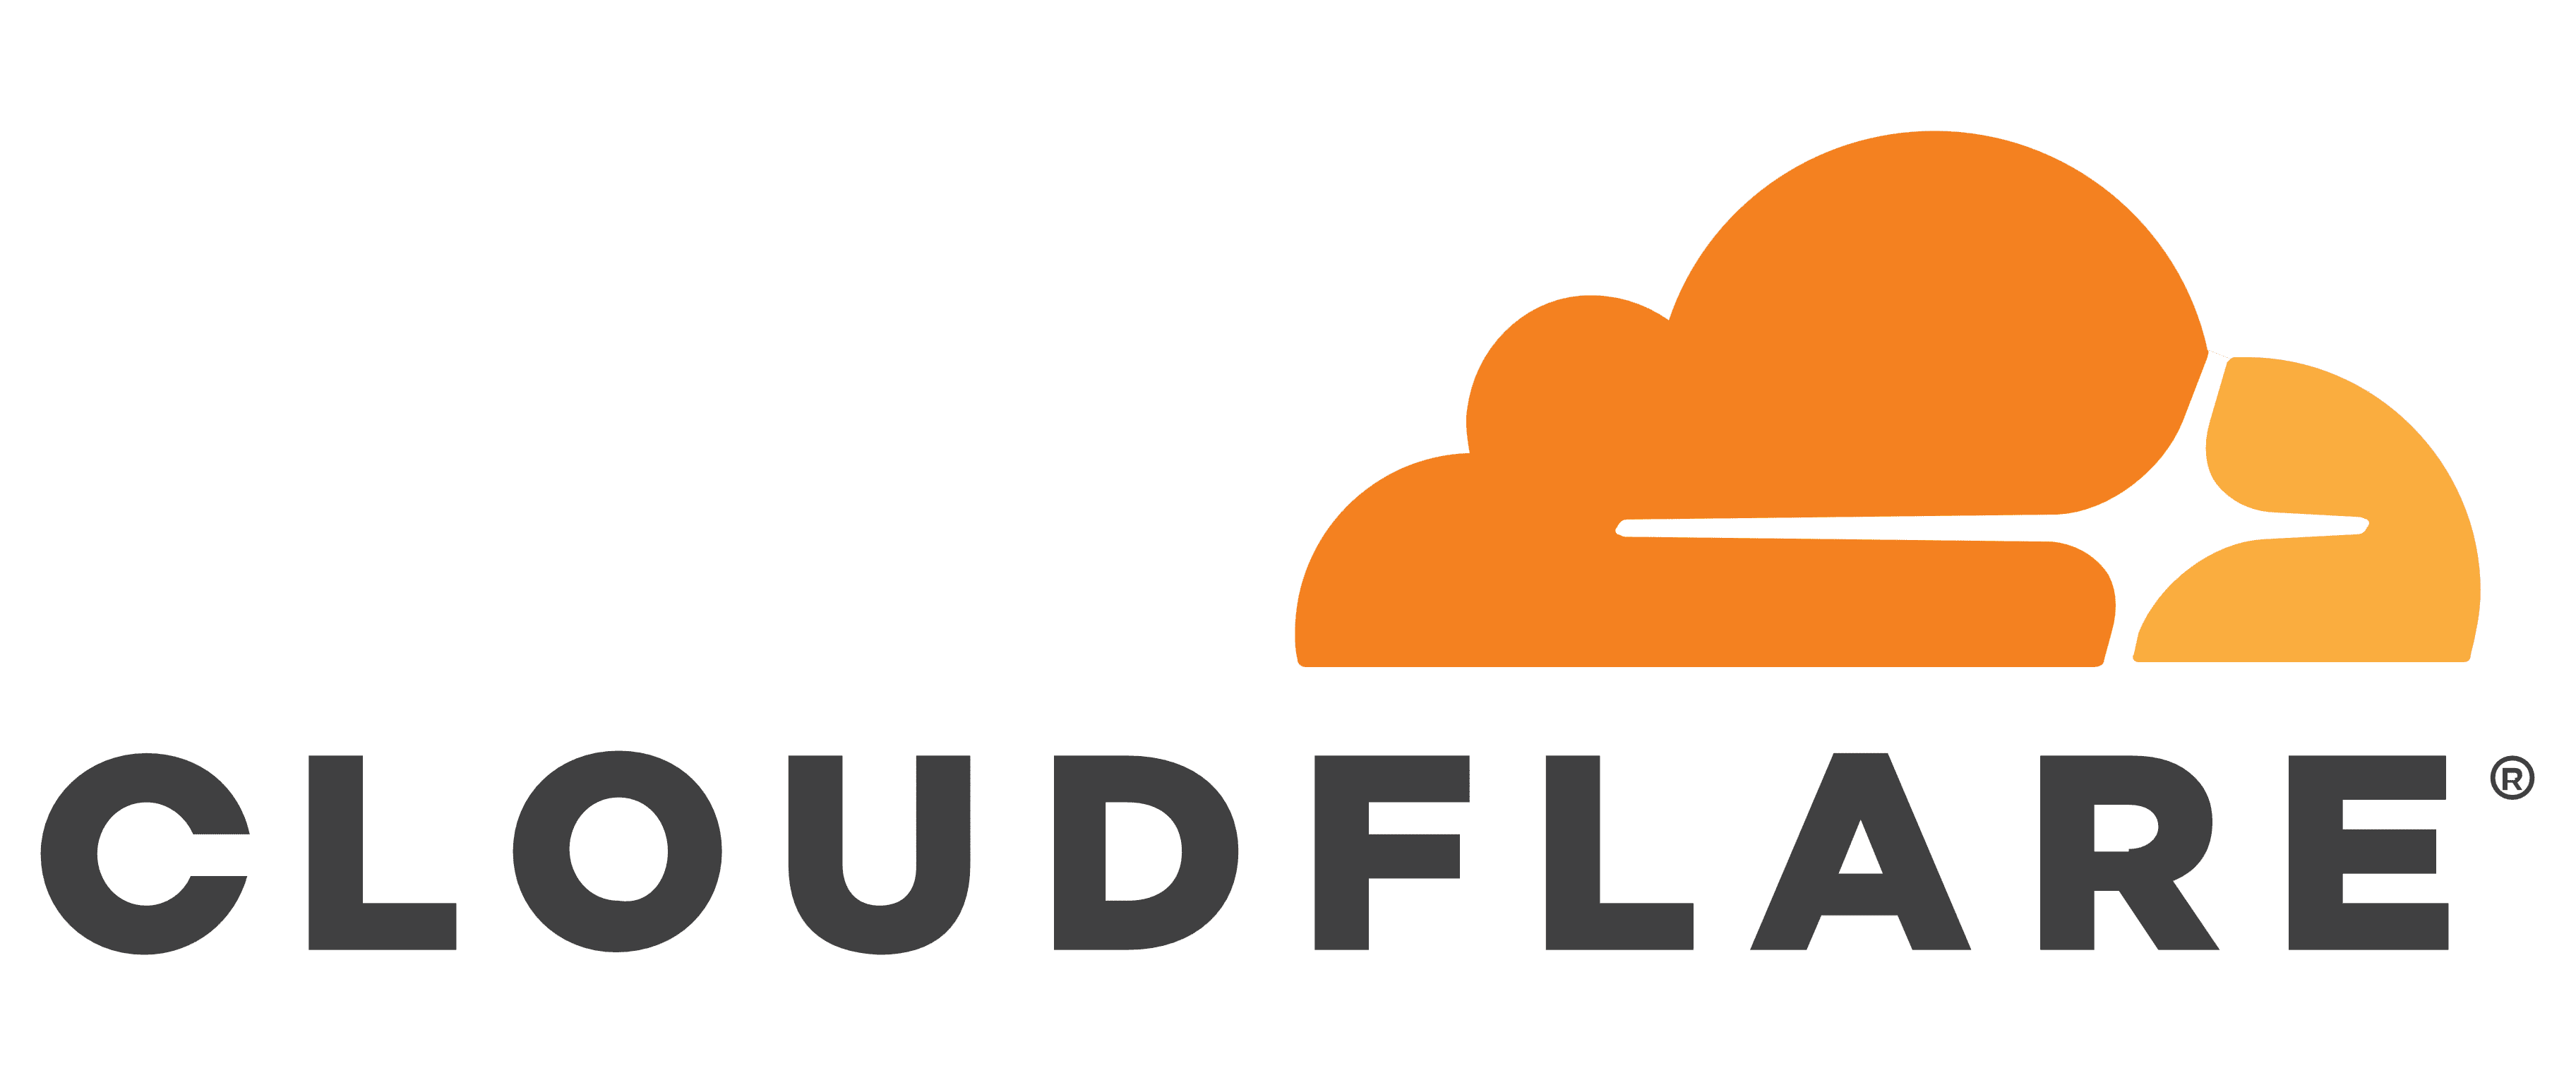 Securing Cloudflare with Cloudflare One